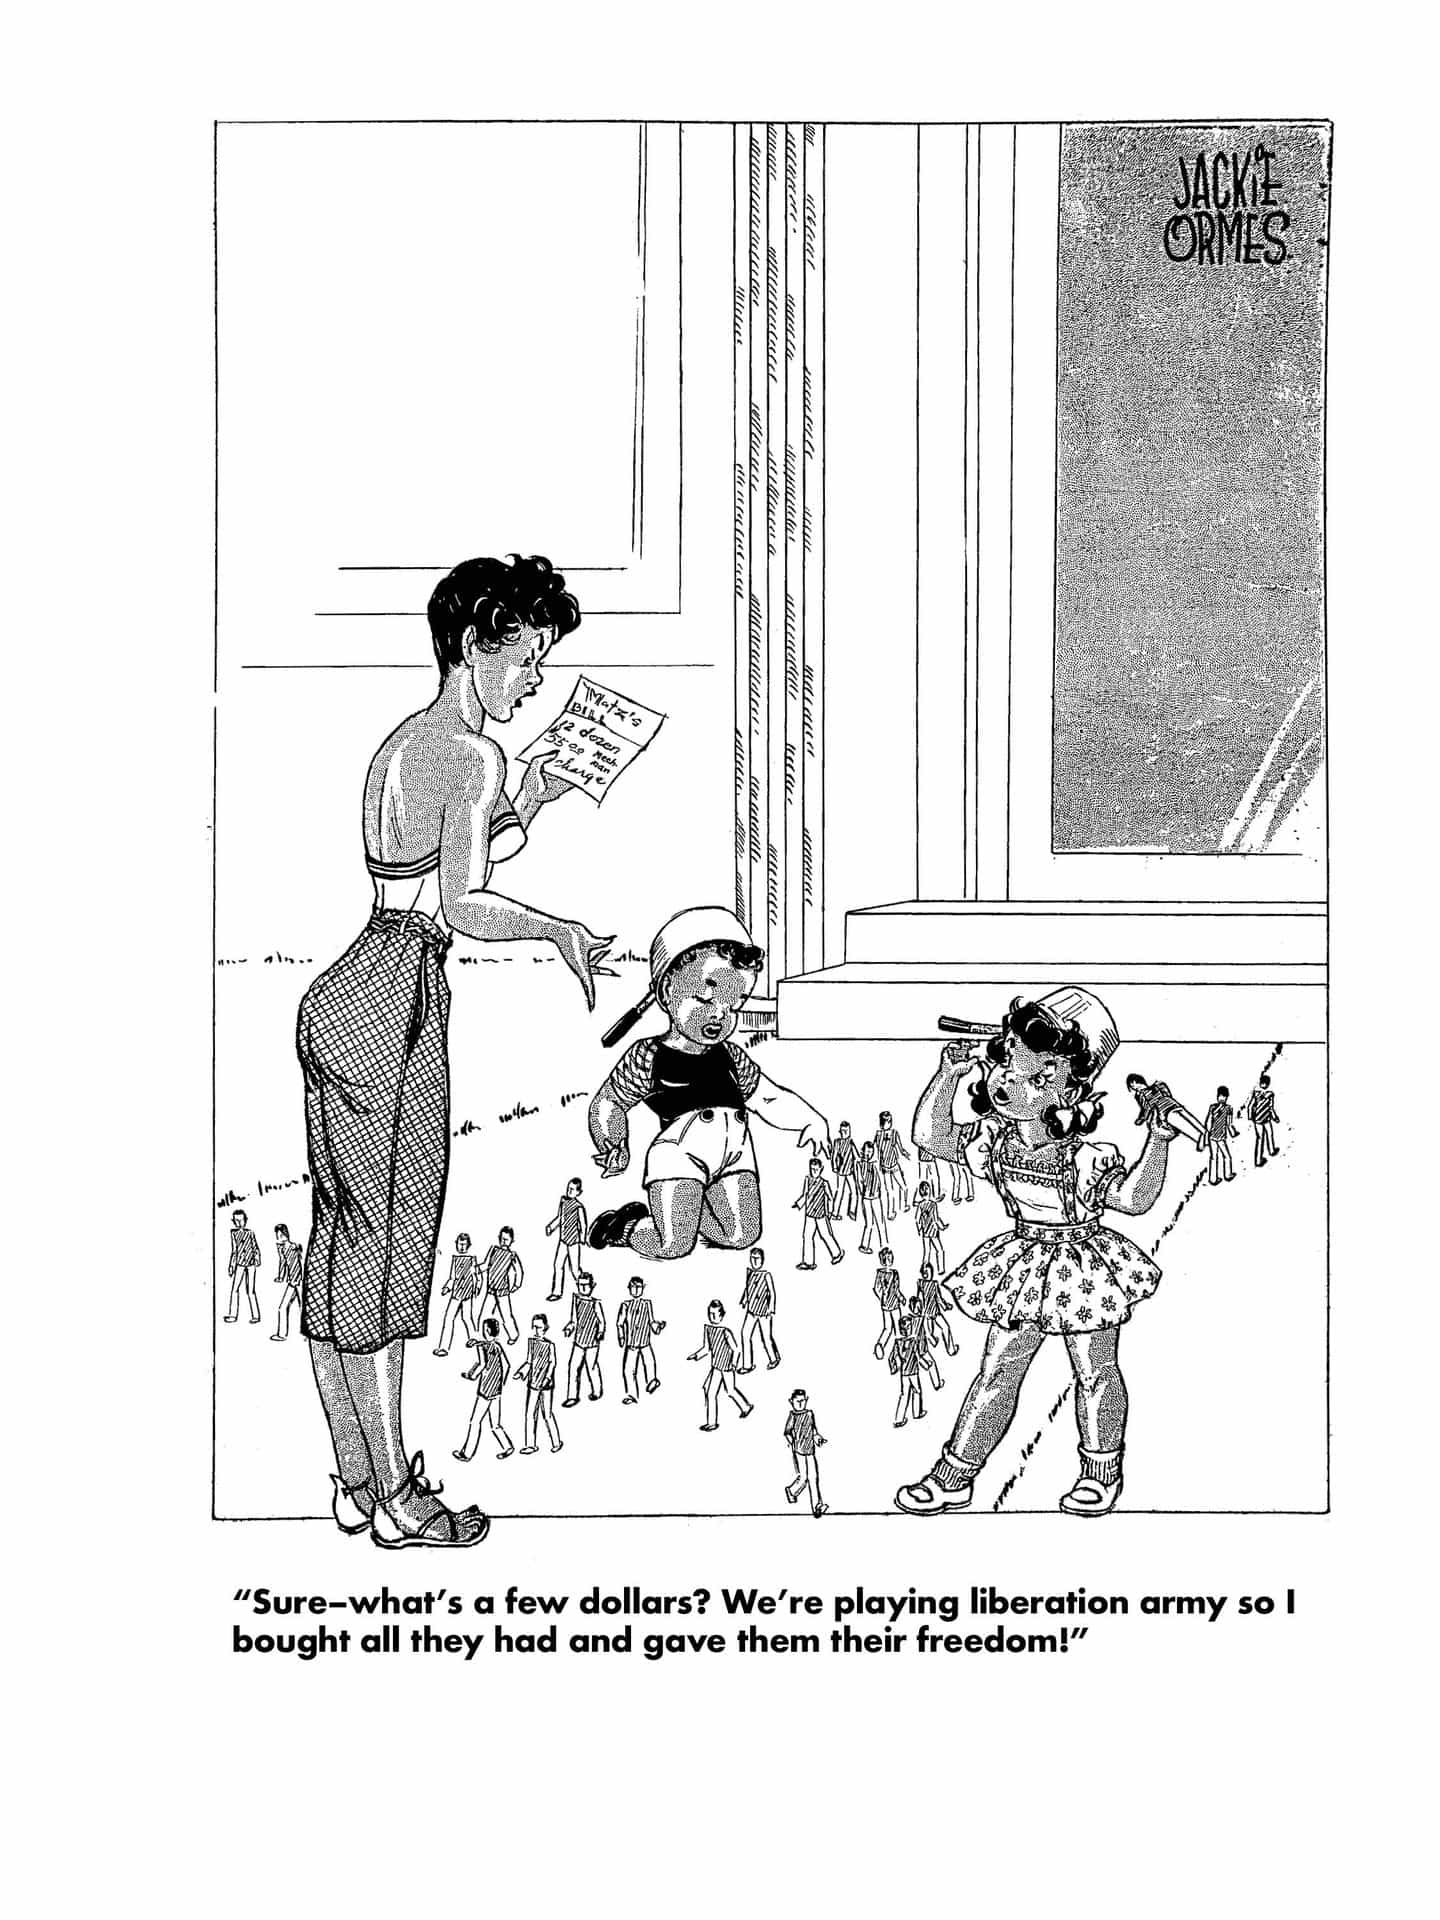 It's Life As I See It: Jackie Ormes, Patty-Jo 'n' Ginger, Pittsburgh Courier, 1947-1951. Cortesía de Tim Jackson (Copyright © Jackie Ormes, 1947-1951)